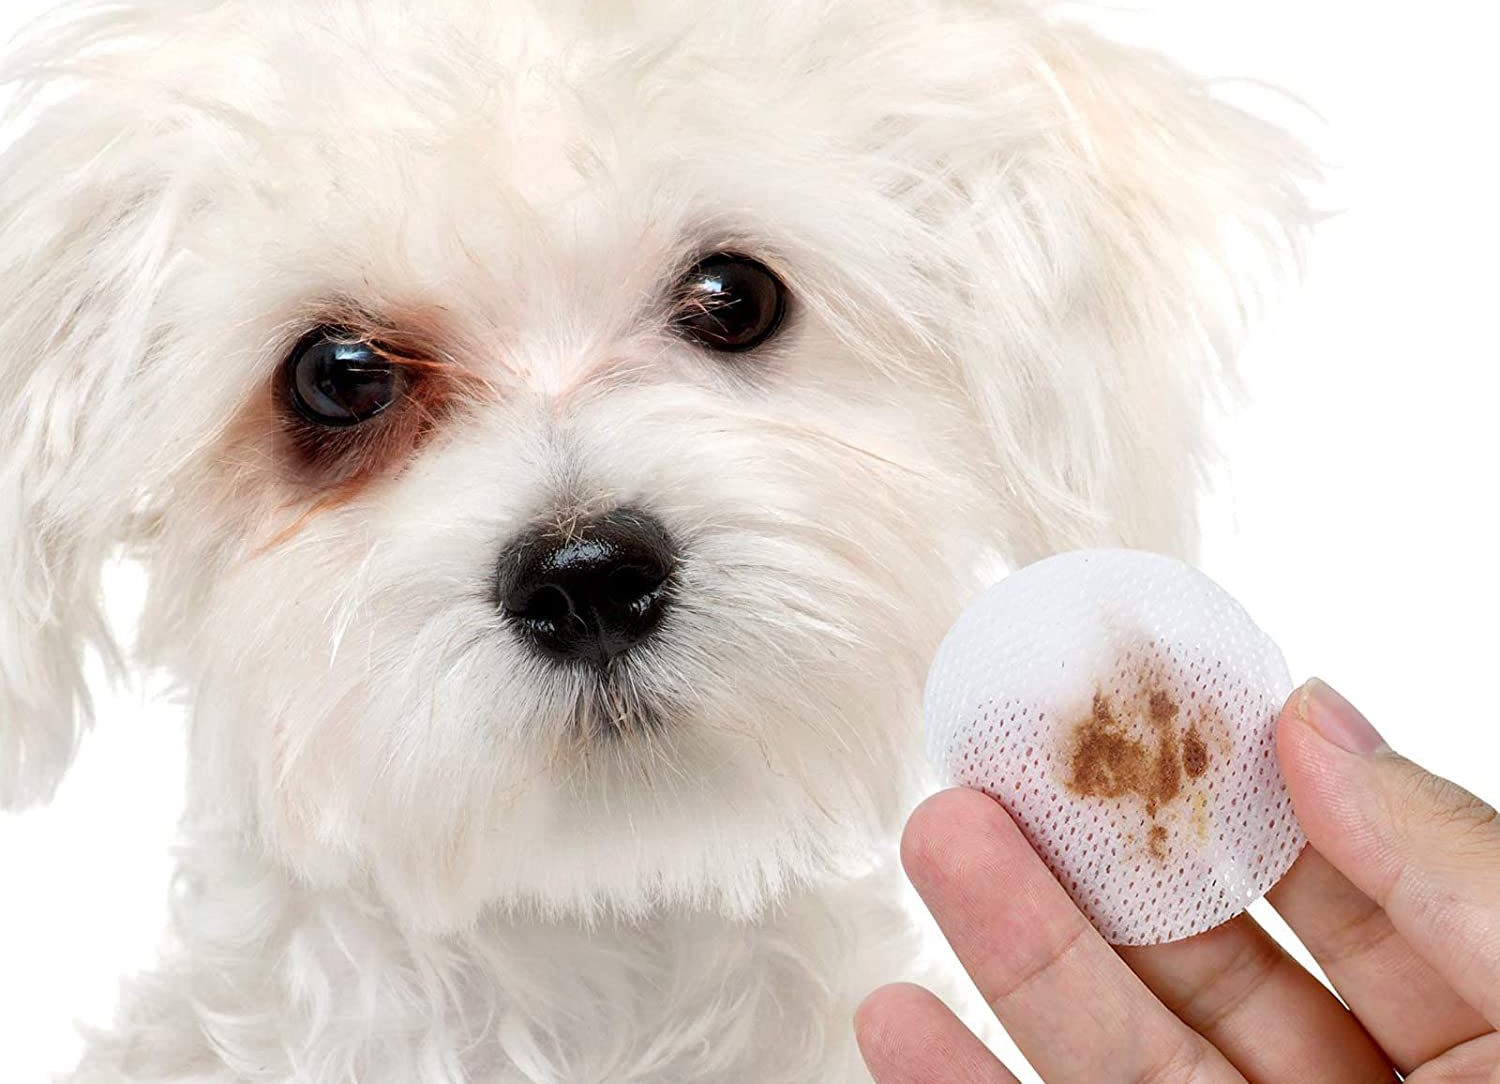 How Do You Get Rid Of Dog Eye Stains